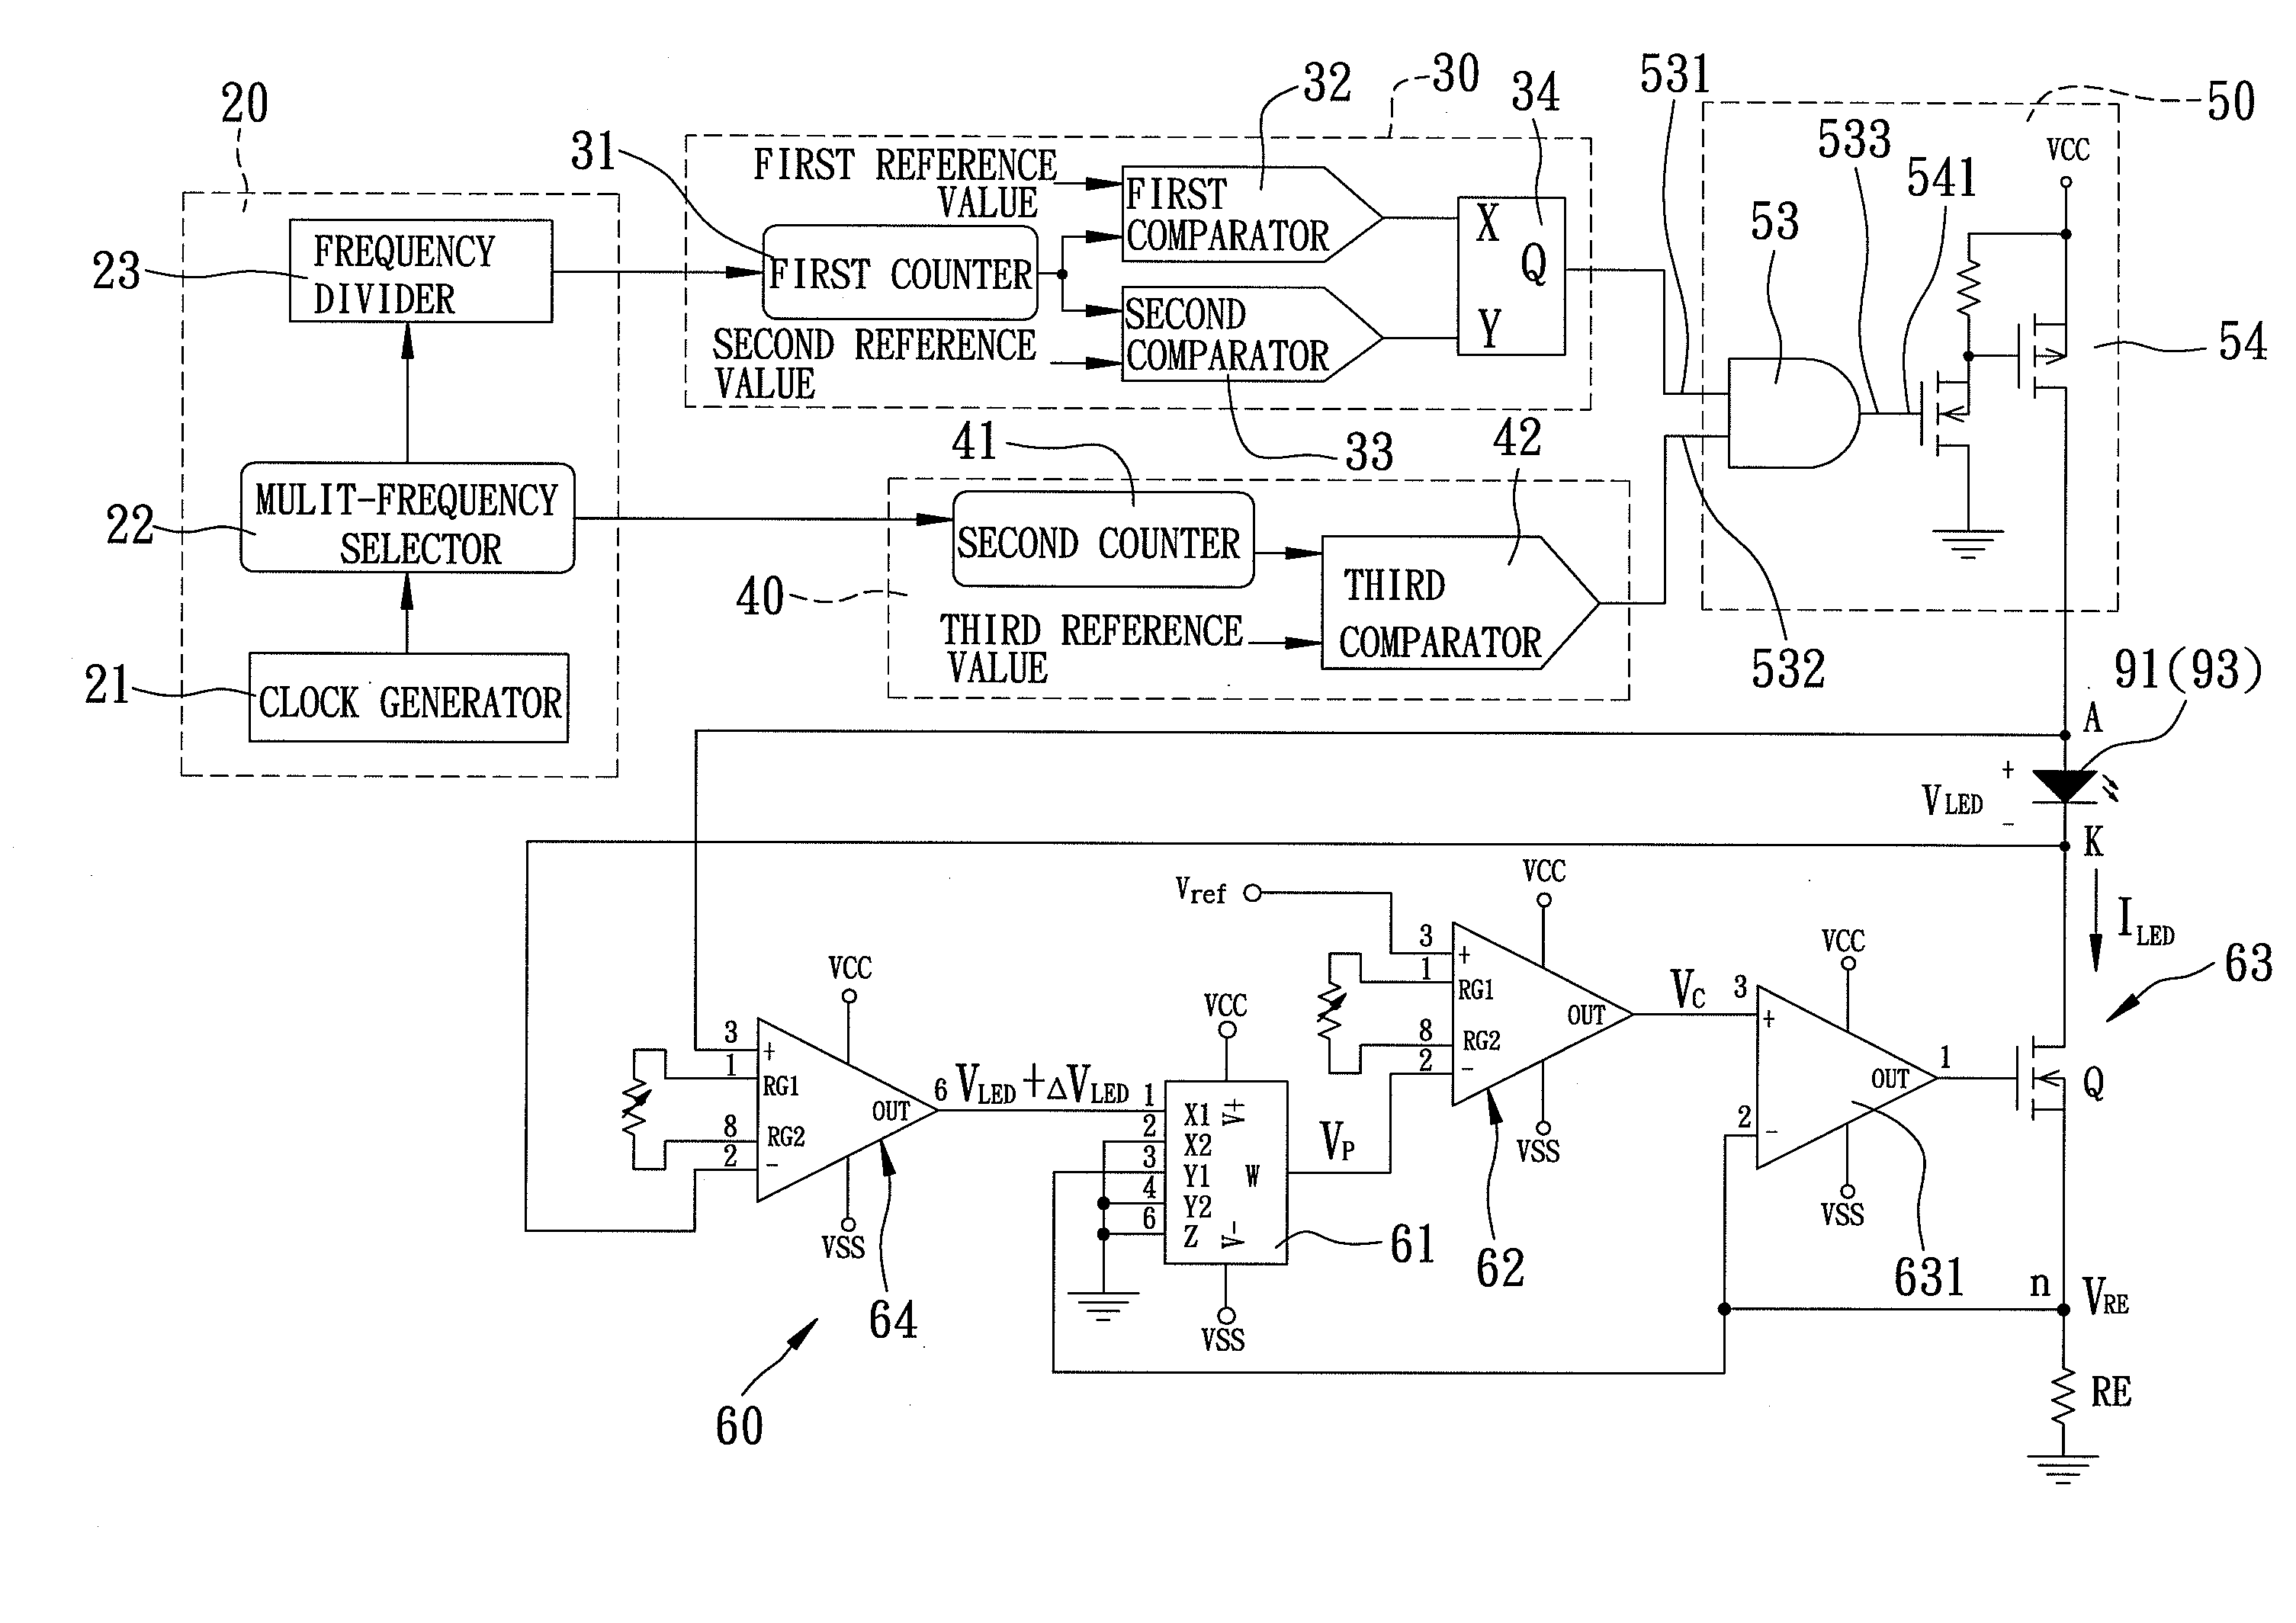 Control system for different colors of light emitting diodes